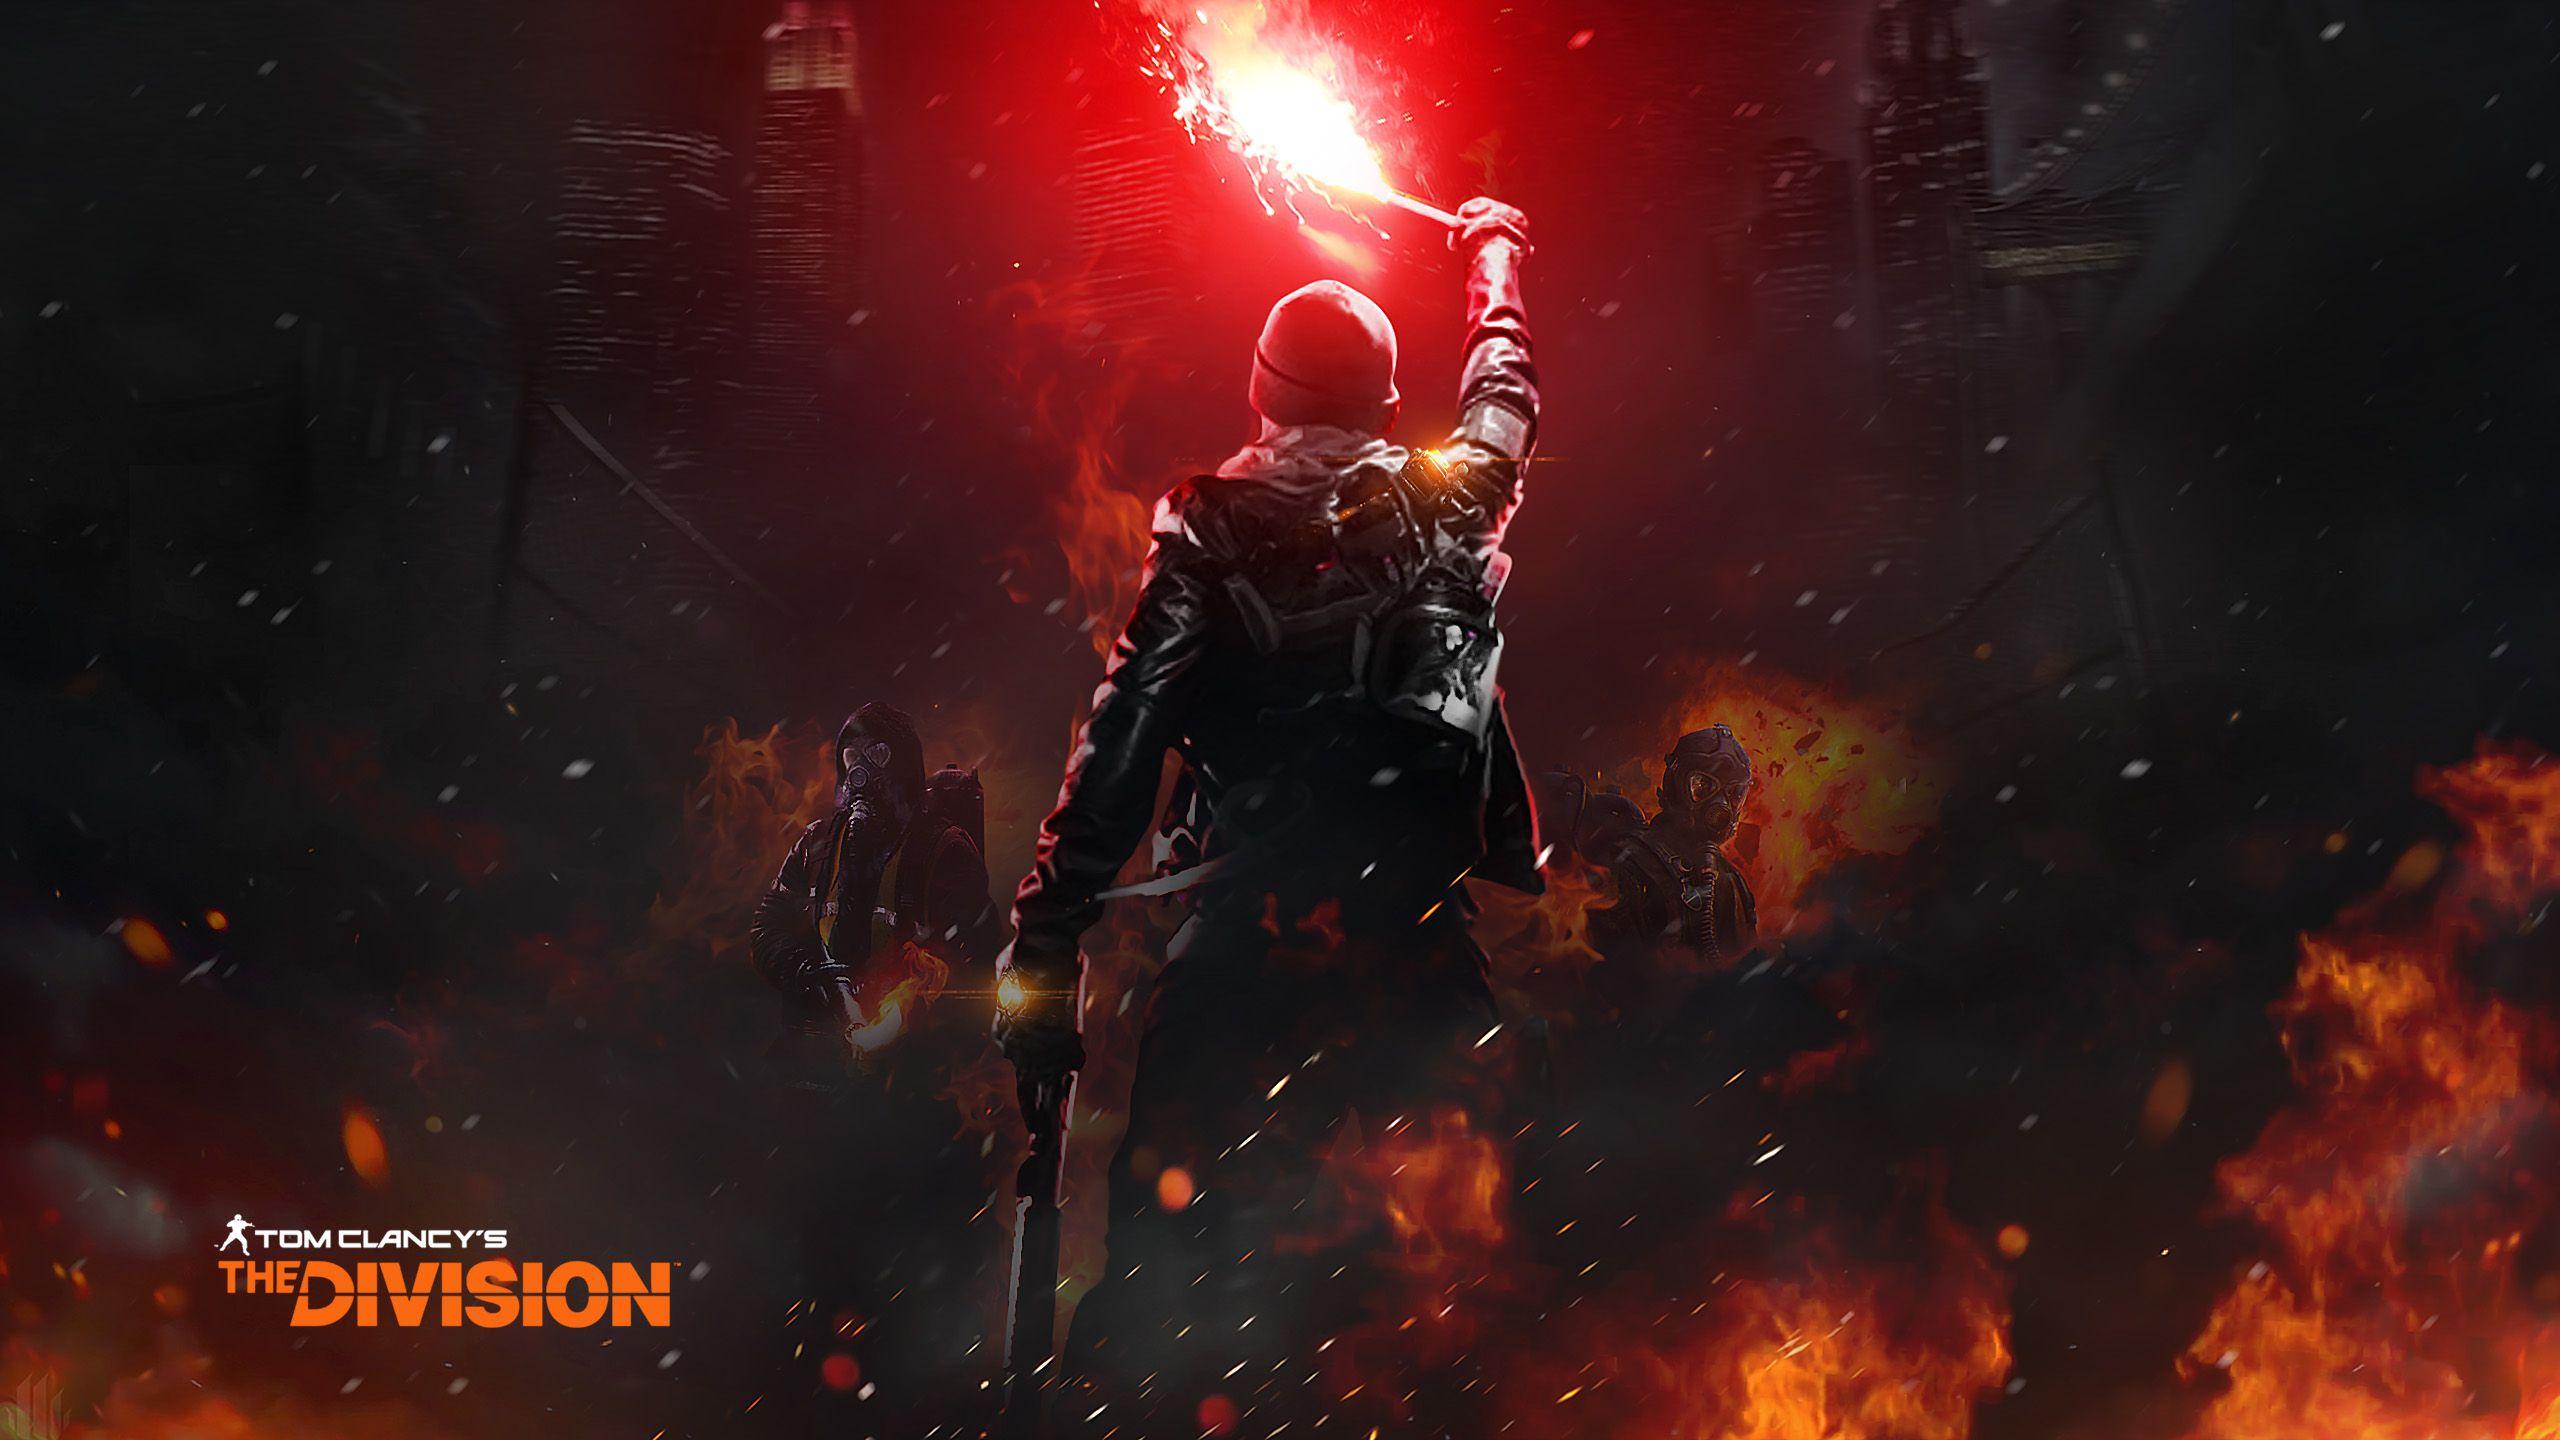 The Division. Gaming wallpaper, Tom clancy